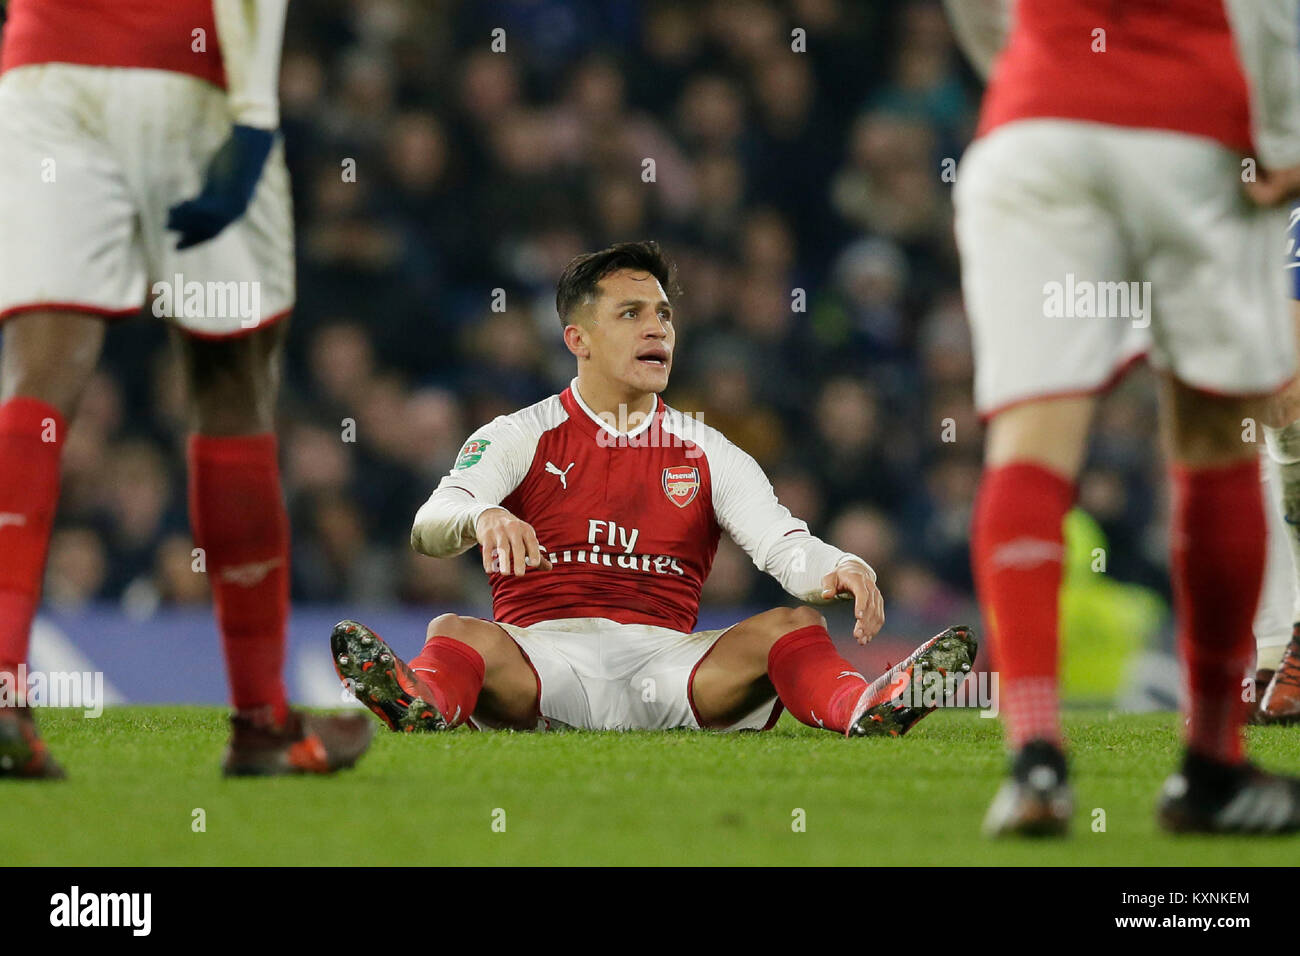 London, UK. 10th Jan, 2018. Arsenal's Alexis Sanchez sits on the pitch dejected during the English League Cup semi-final 1st leg match between Chelsea and Arsenal at Stamford Bridge Stadium in London, Britain on Jan. 10, 2018. Chelsea and Arsenal drew 0-0. Credit: Tim Ireland/Xinhua/Alamy Live News Stock Photo